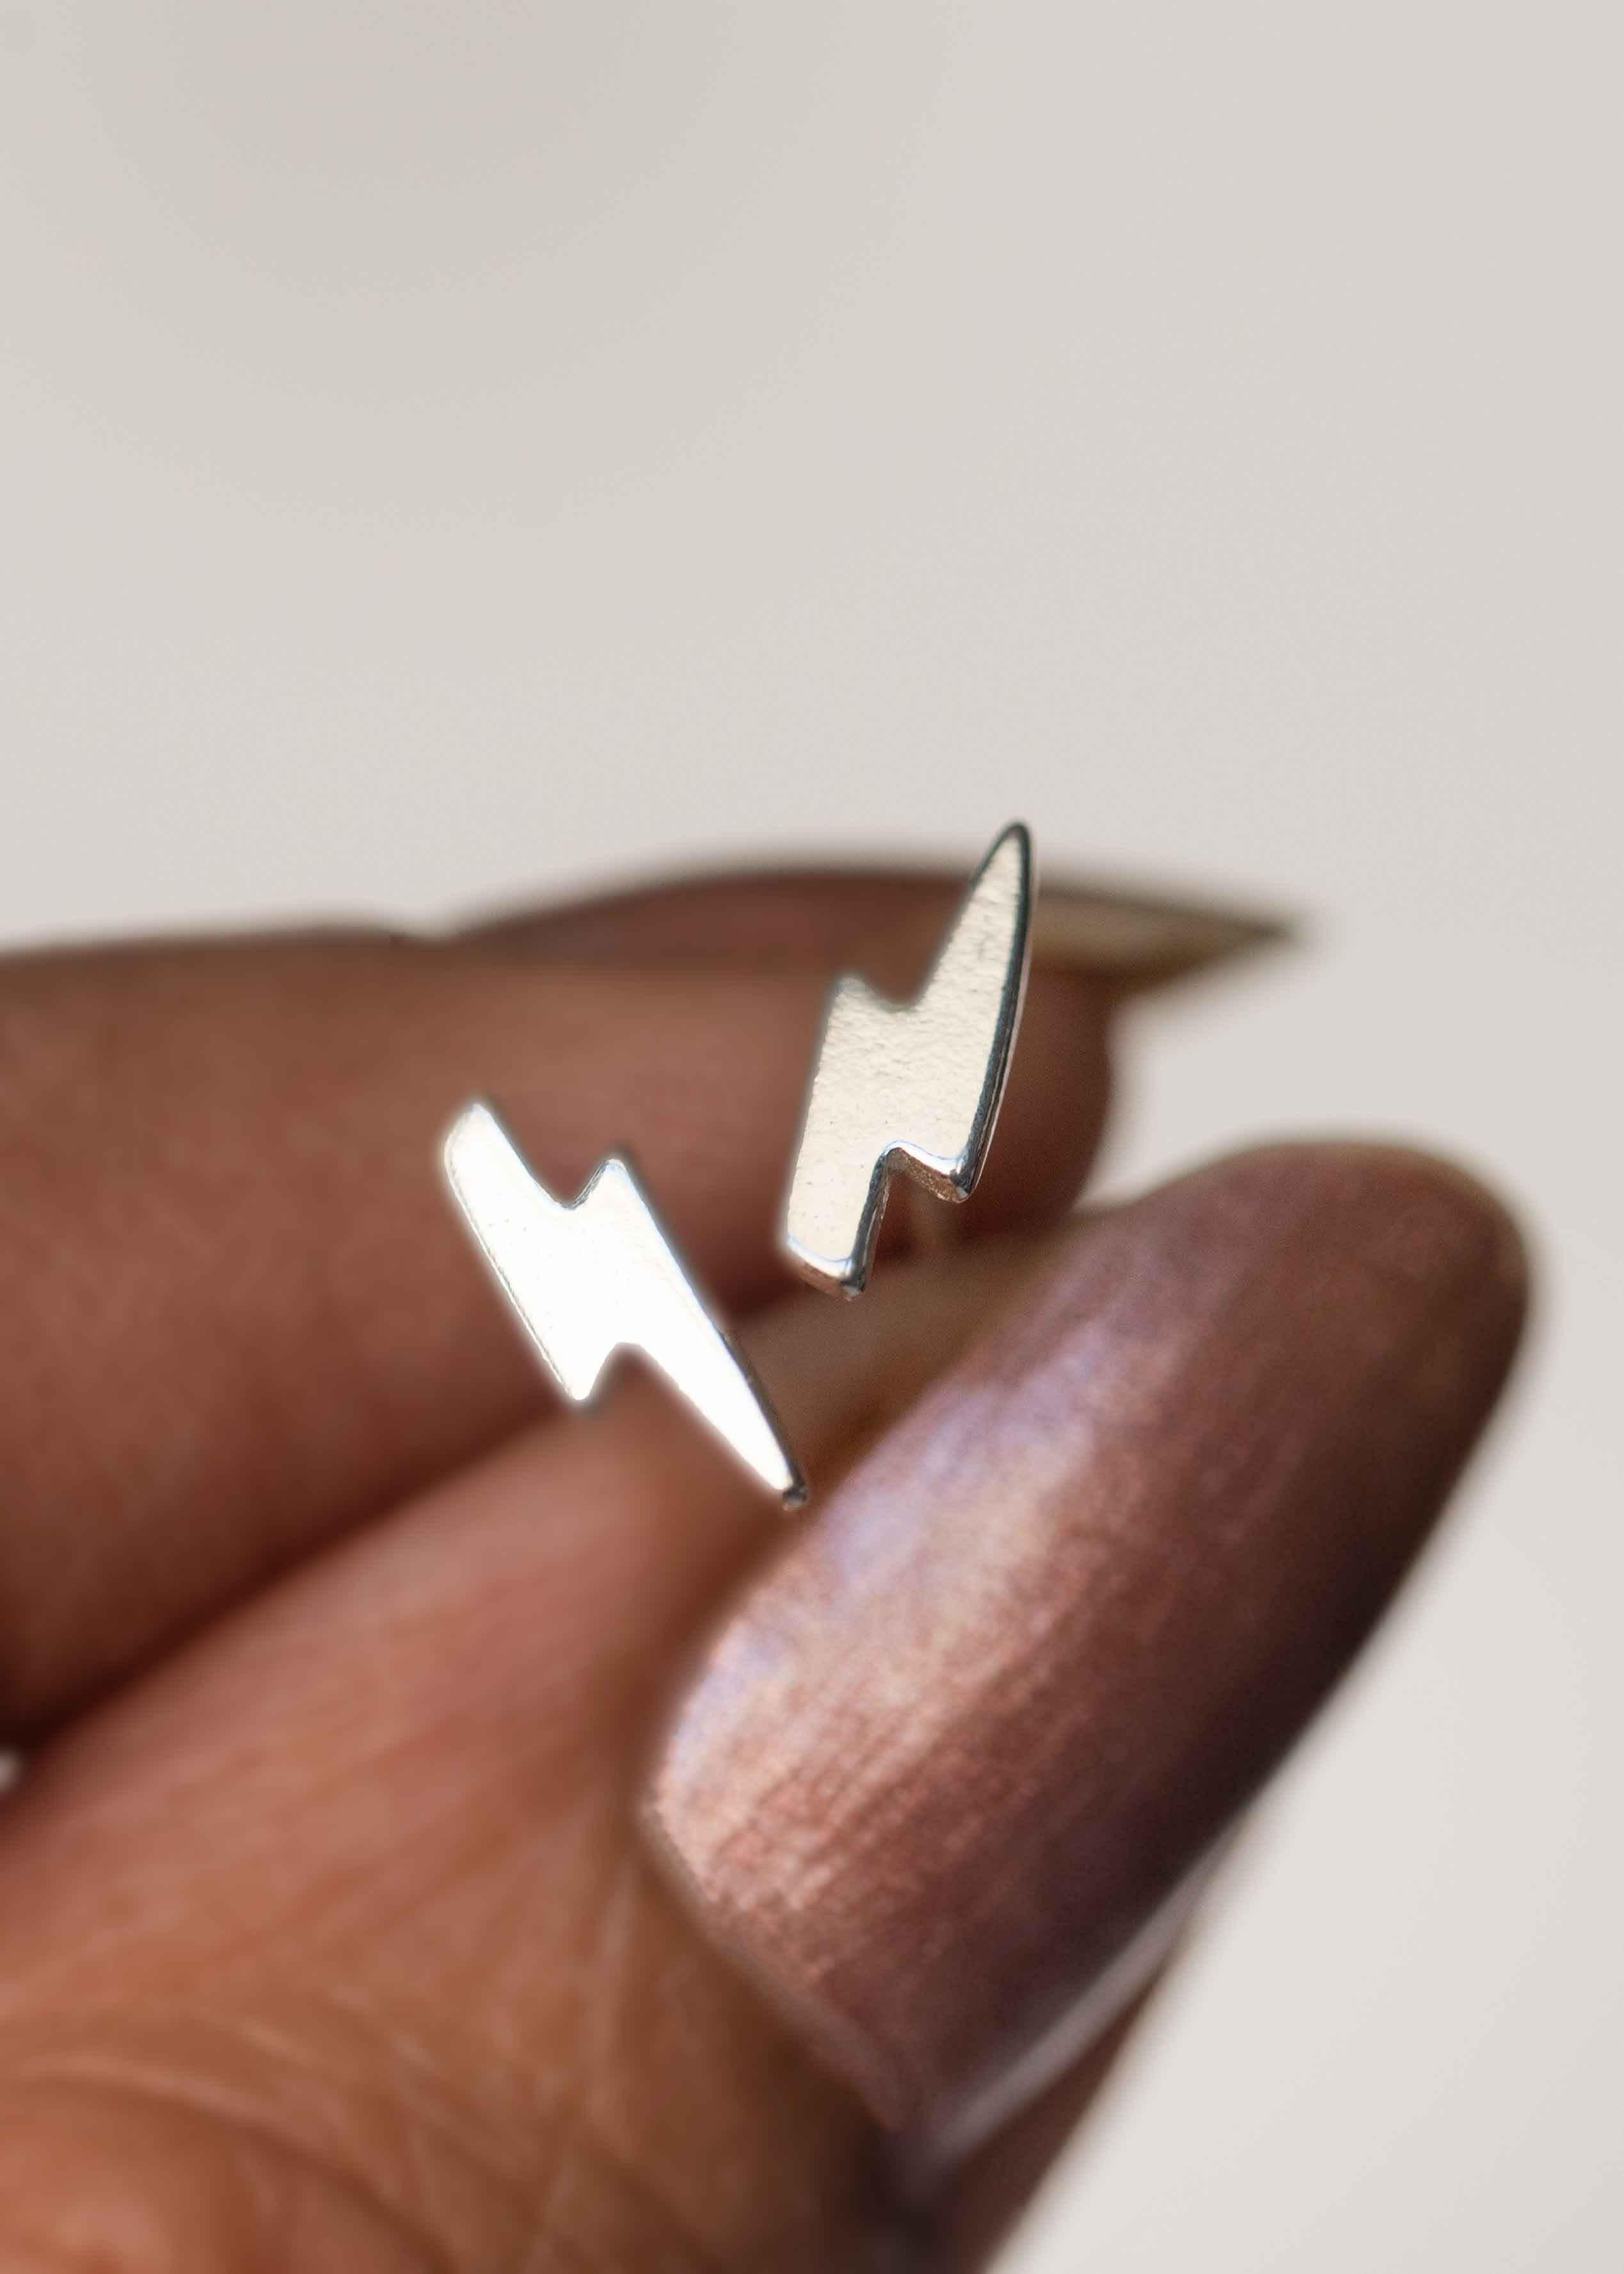 lightning studs small earrings for cartilage second piercing gift for girls